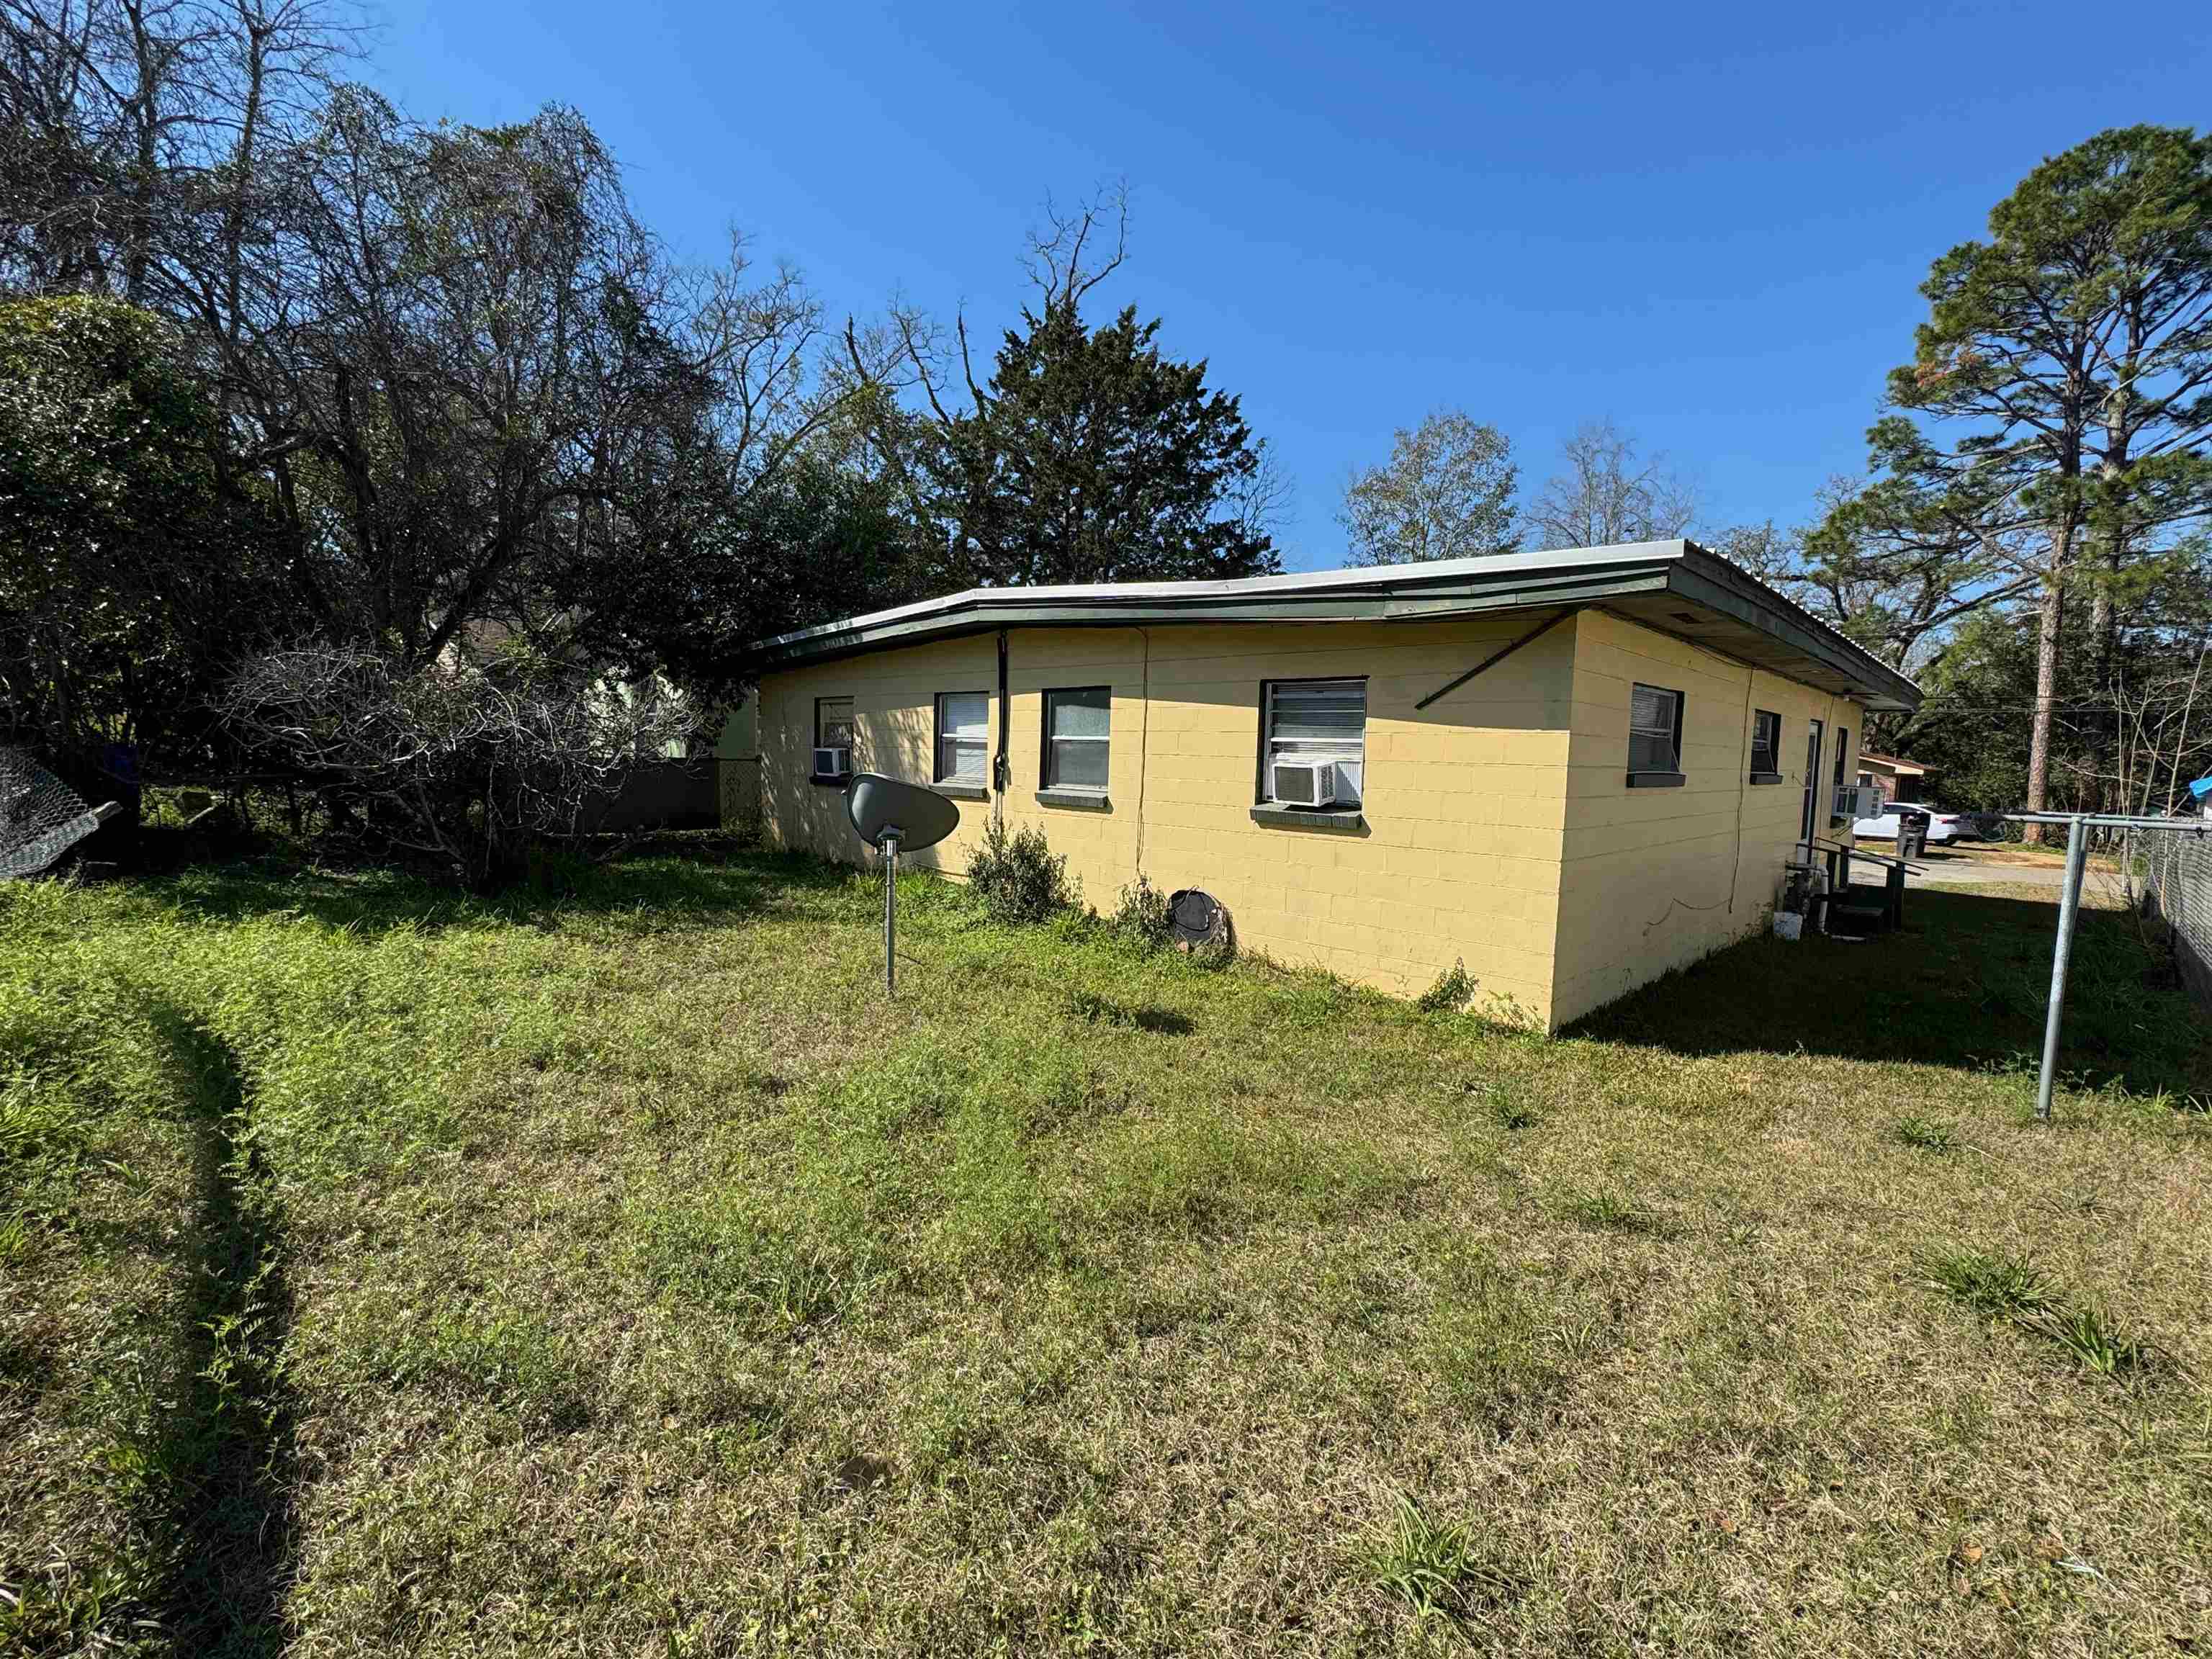 2137 Keith St,TALLAHASSEE,Florida 32310,5 Bedrooms Bedrooms,1 BathroomBathrooms,Multi-family,Keith St,368861